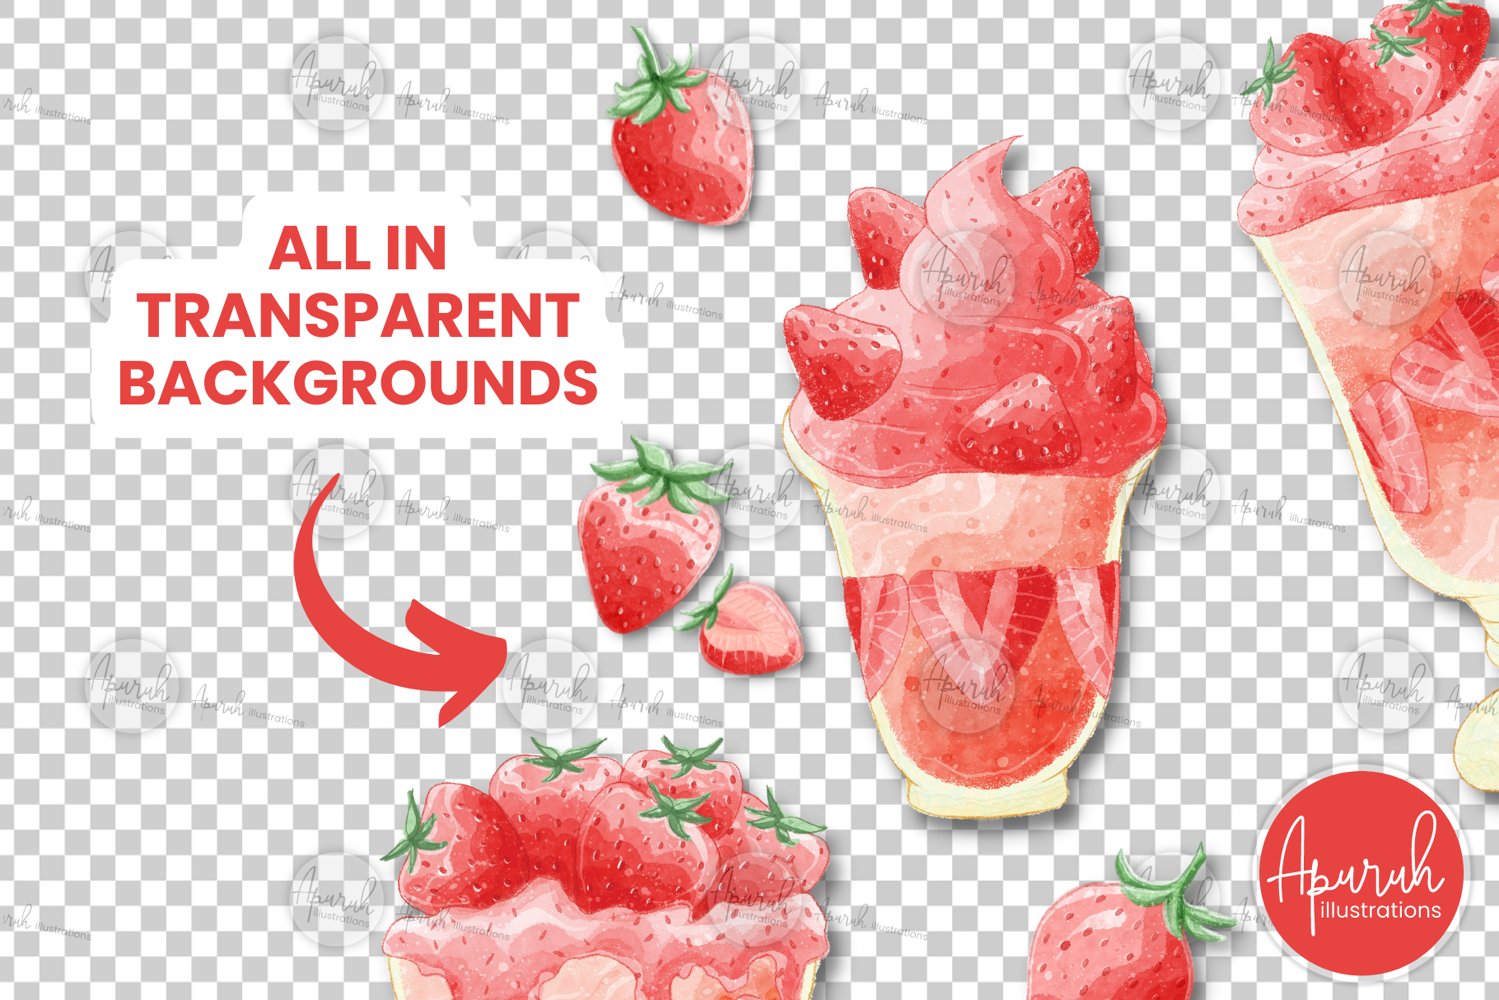 All elements are in transparent background.